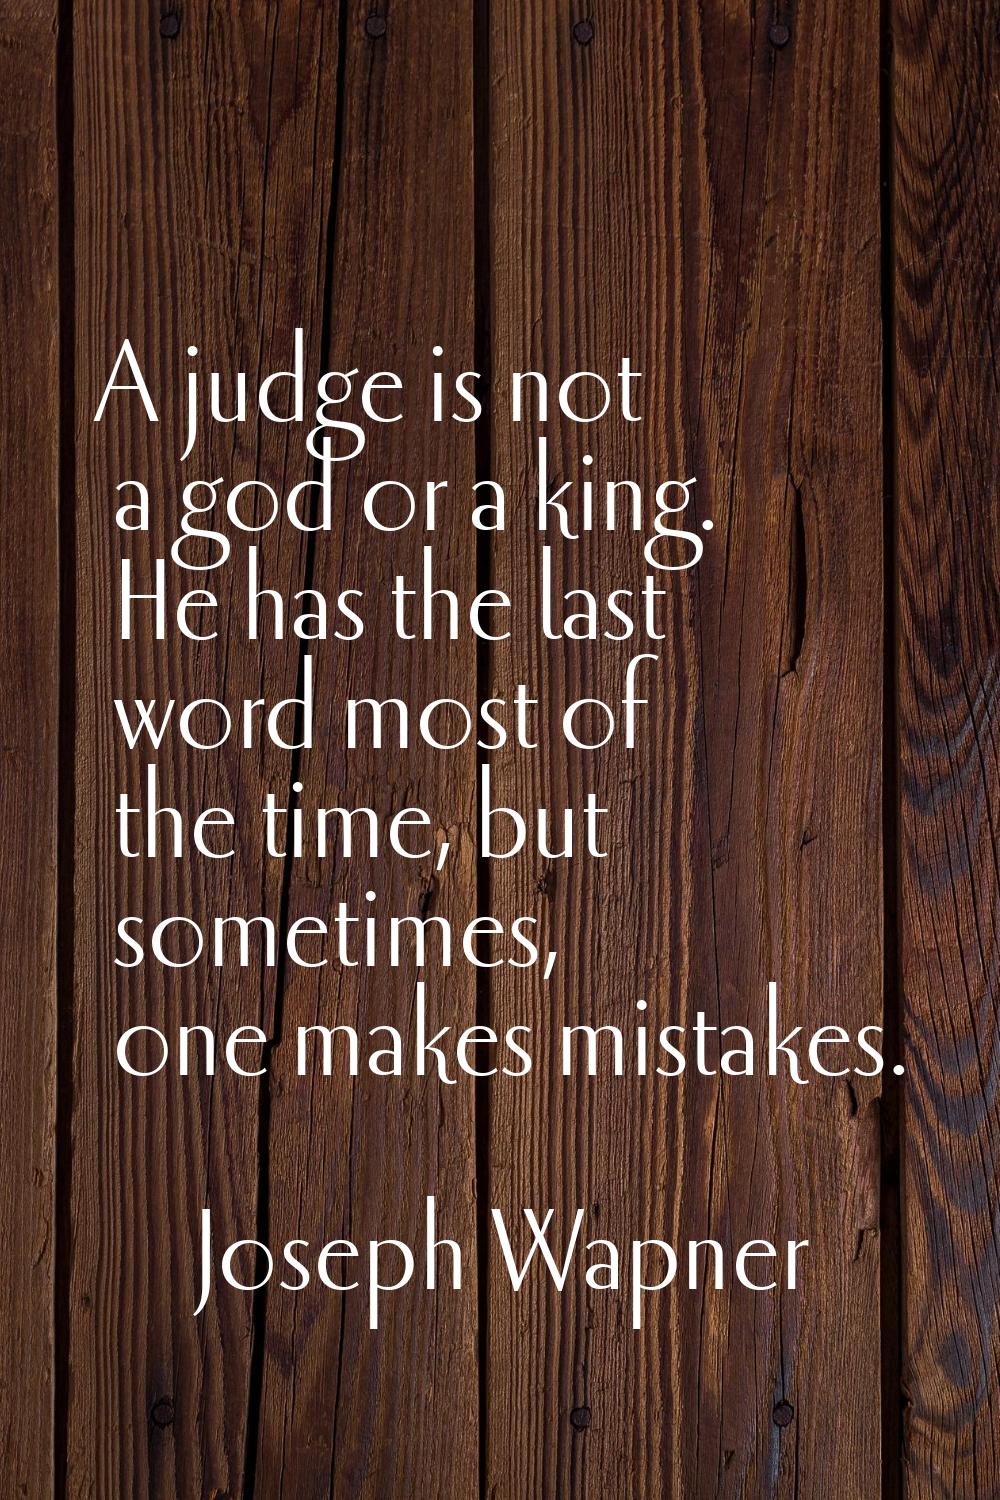 A judge is not a god or a king. He has the last word most of the time, but sometimes, one makes mis